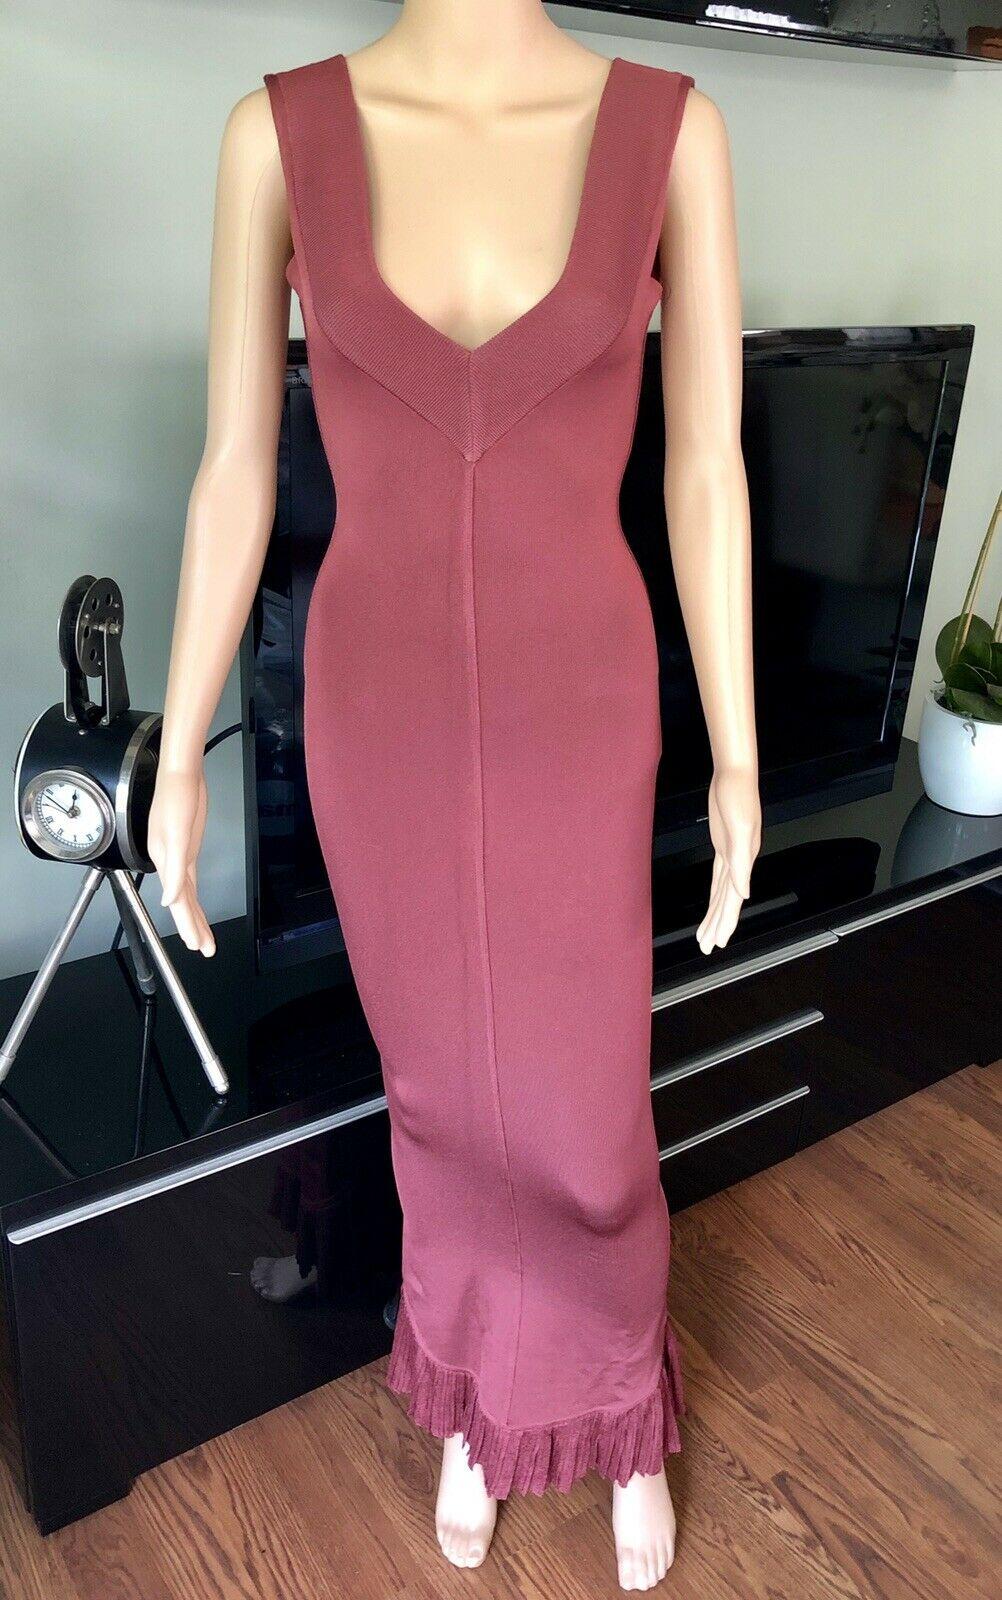 Azzedine Alaia S/S 1990 Vintage Dress Gown Size XS

Dusty rose Alaïa sleeveless maxi dress with tonal stitching throughout, V-neck, open back, pleated trim at hem and concealed zip closure at back.

All Eyes on Alaïa

For the last half-century, the